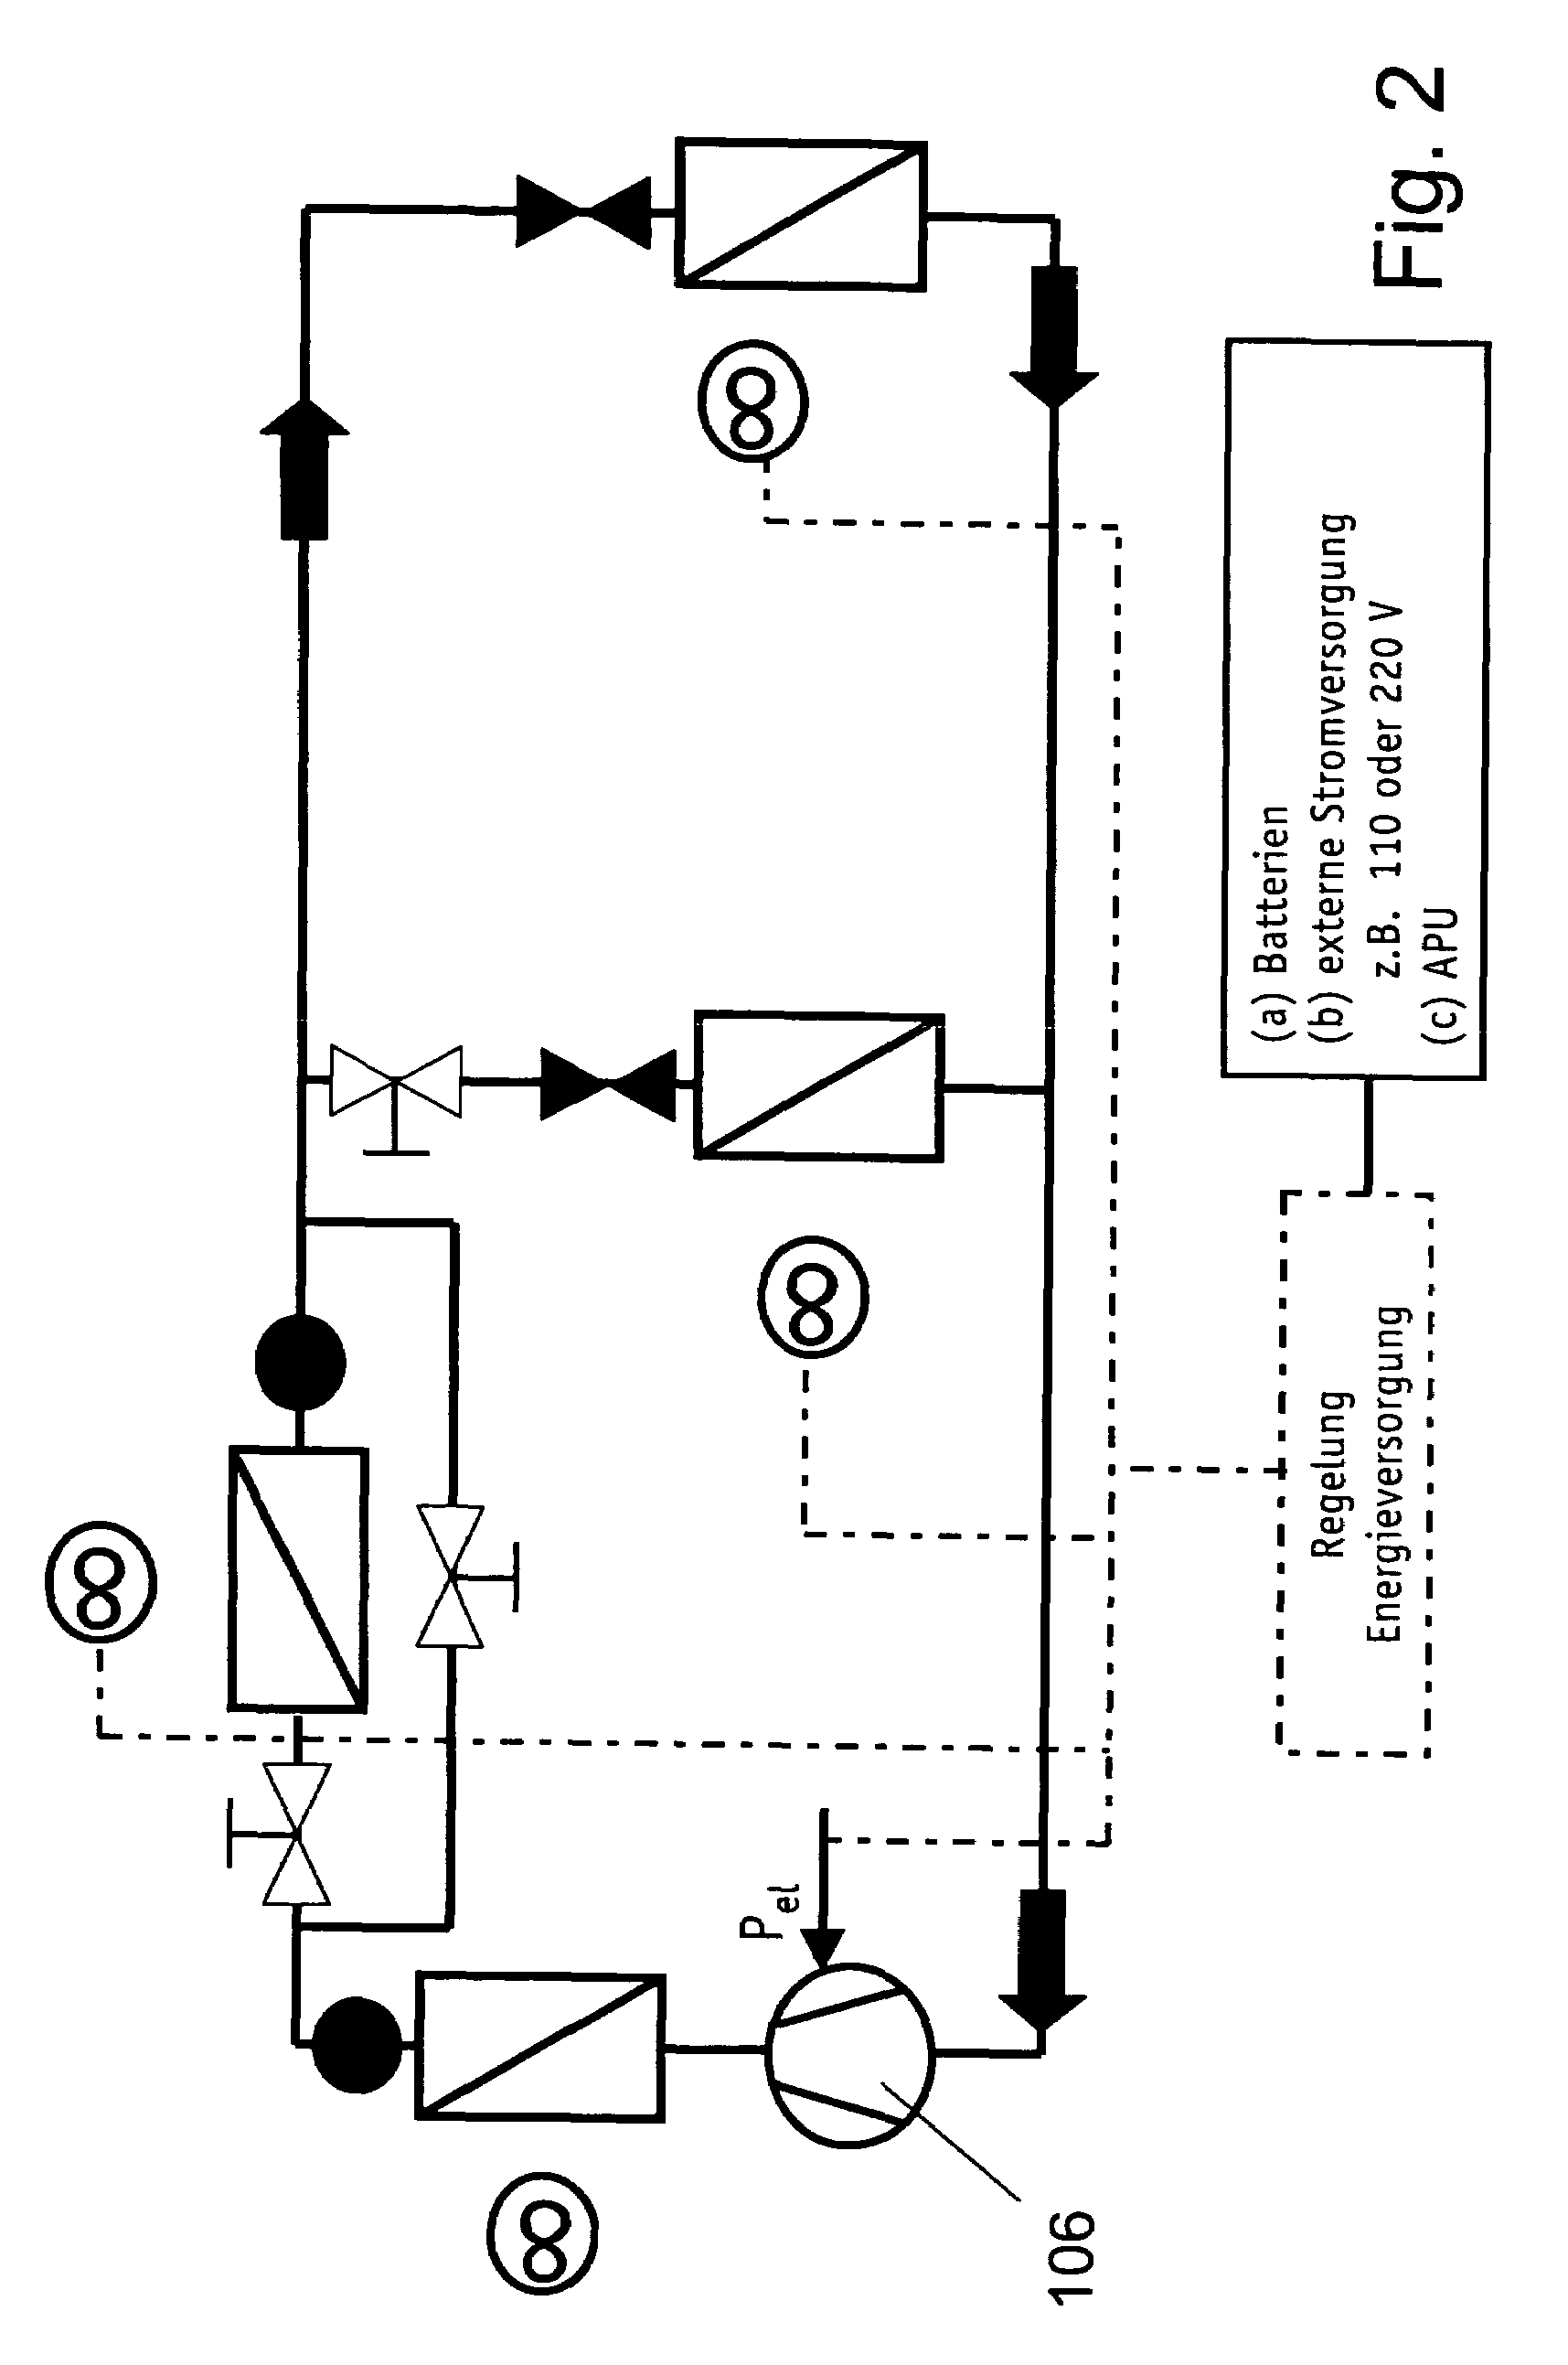 Stationary vehicle air conditioning system